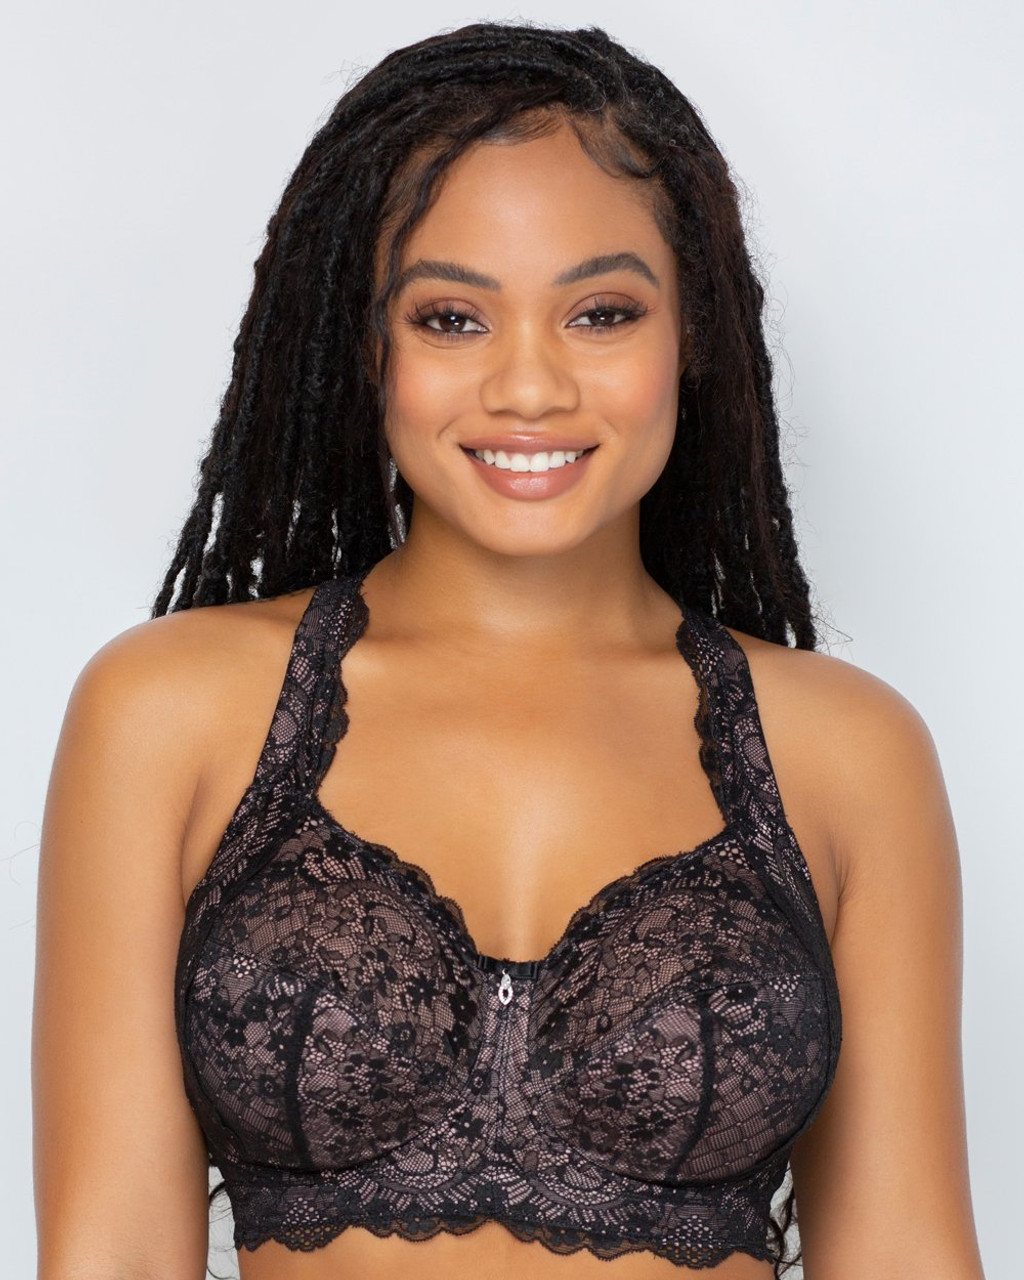 Curvy Couture Luxe Lace Wirefree Bralette in Black Hue with Ballet